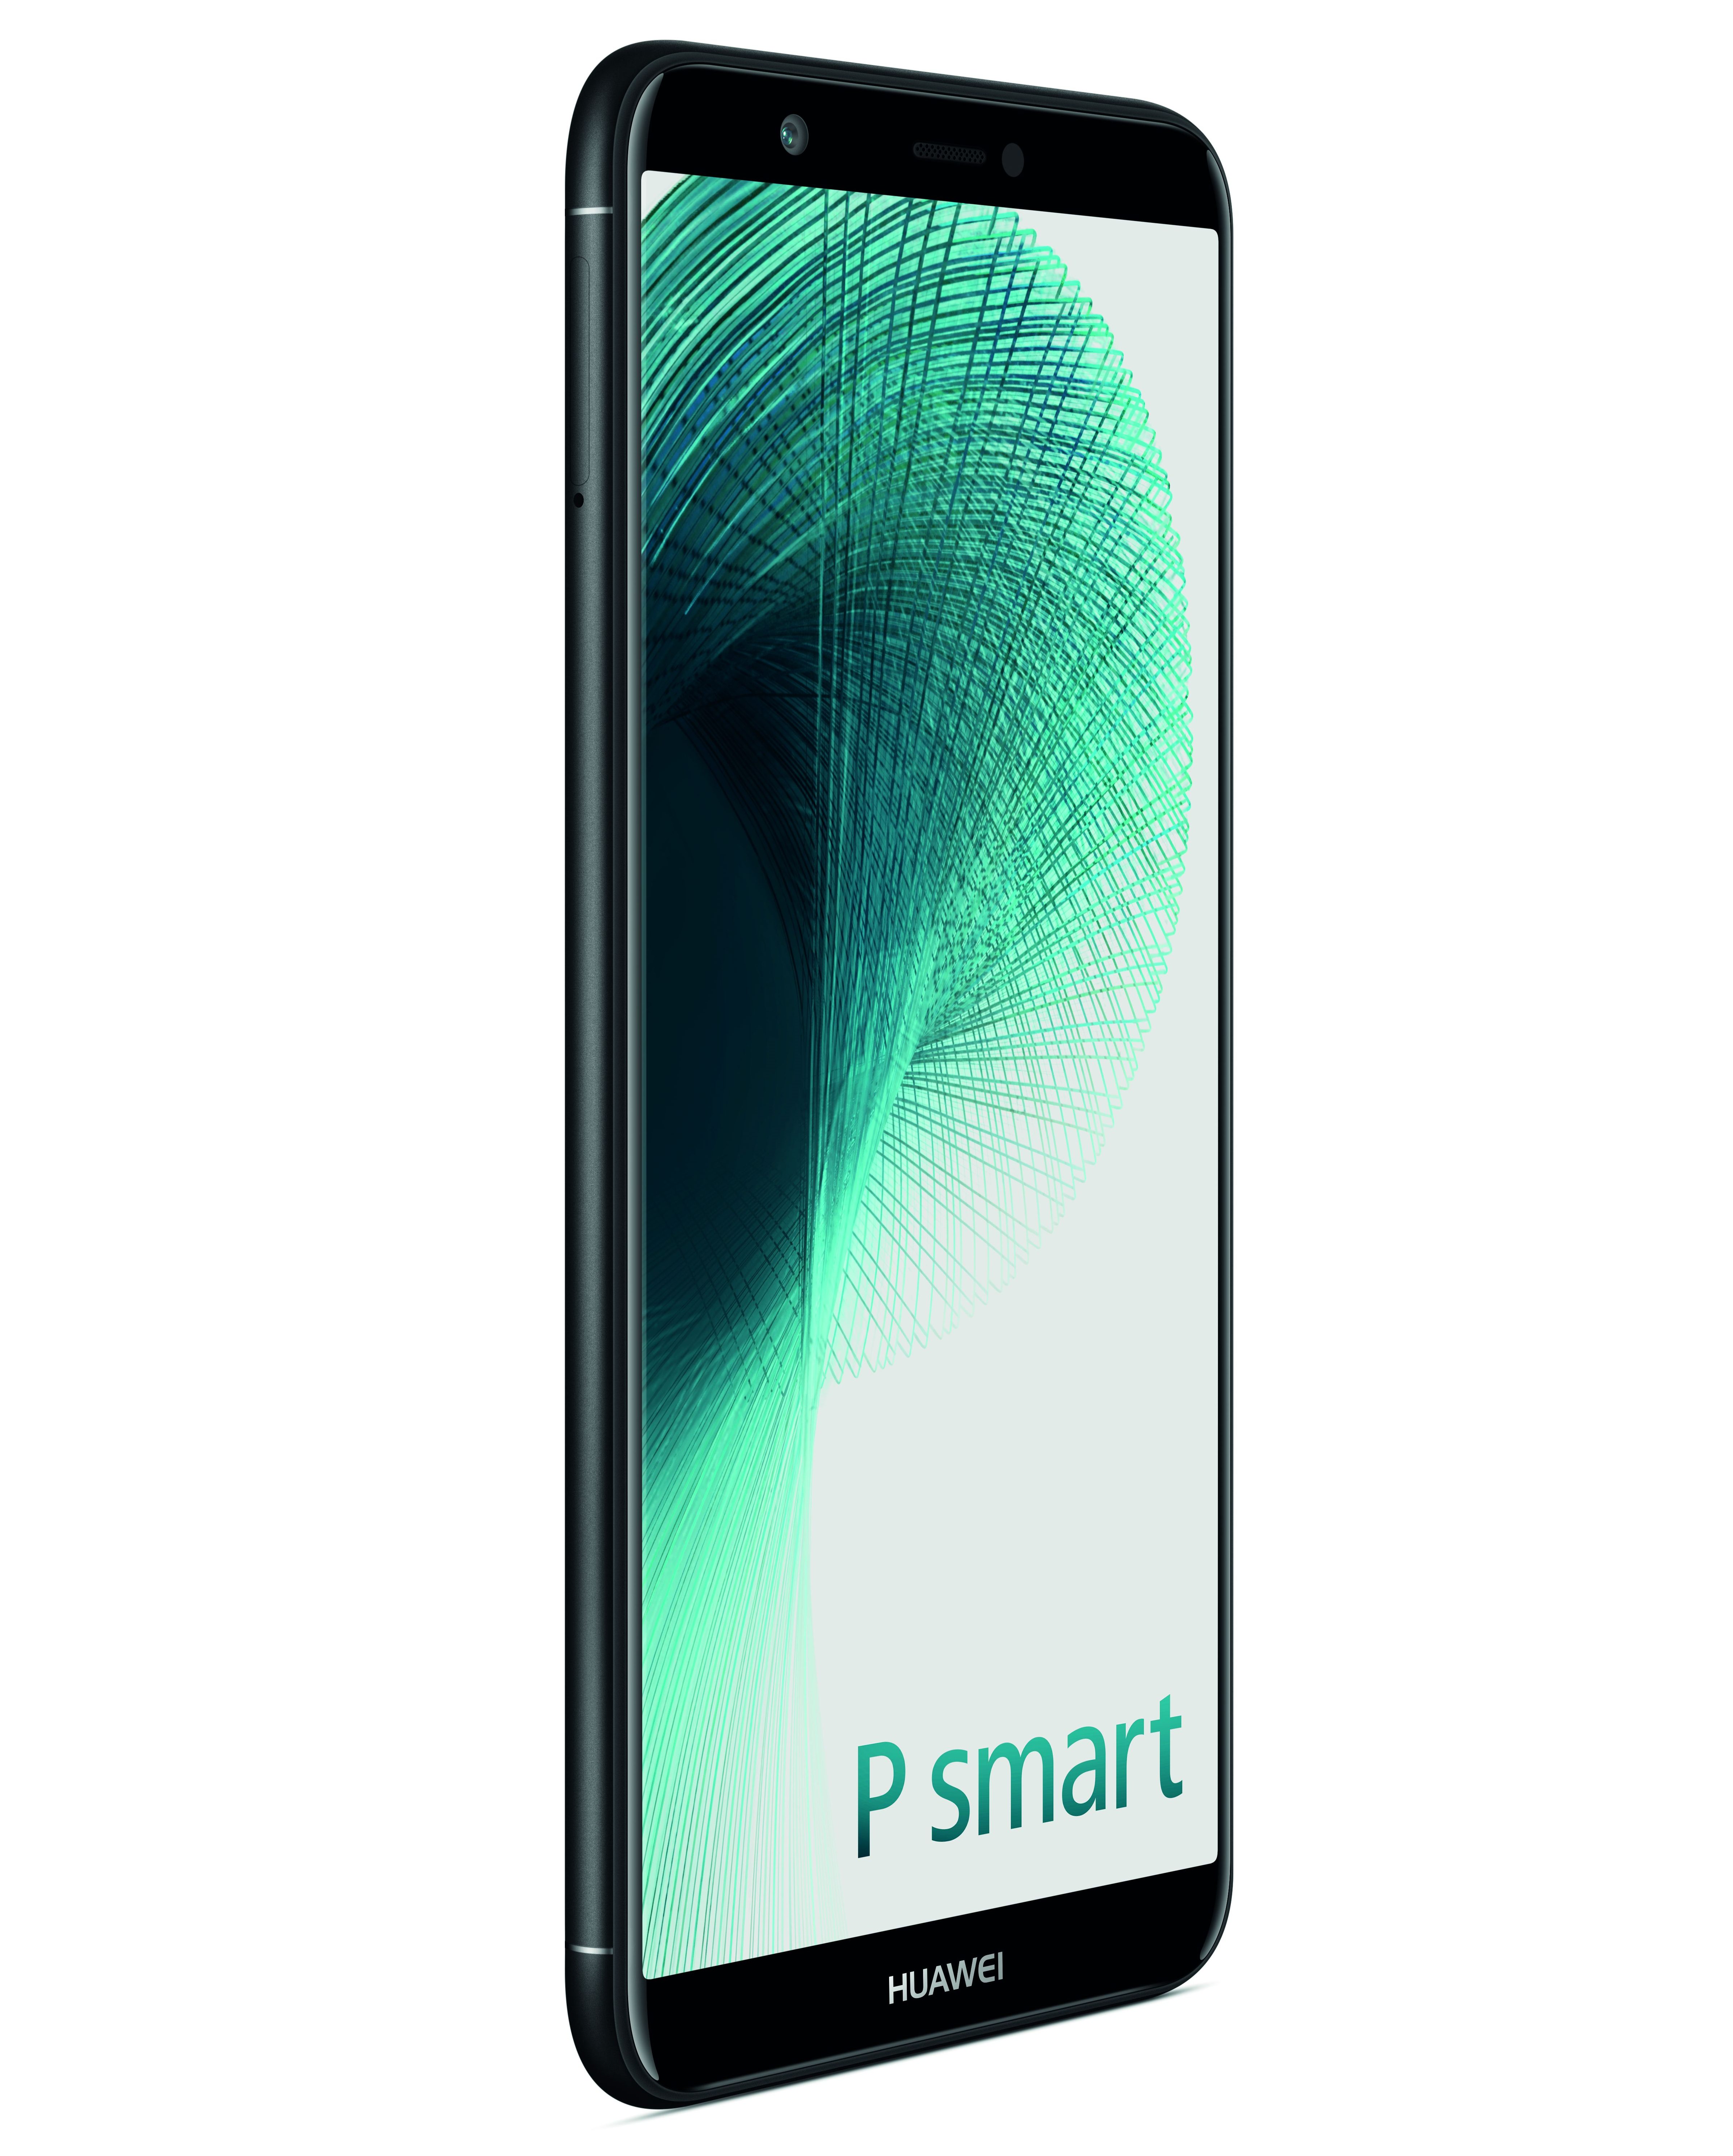 Huawei P smart coming to the UK, and exclusively to ... - 4795 x 5967 jpeg 1453kB